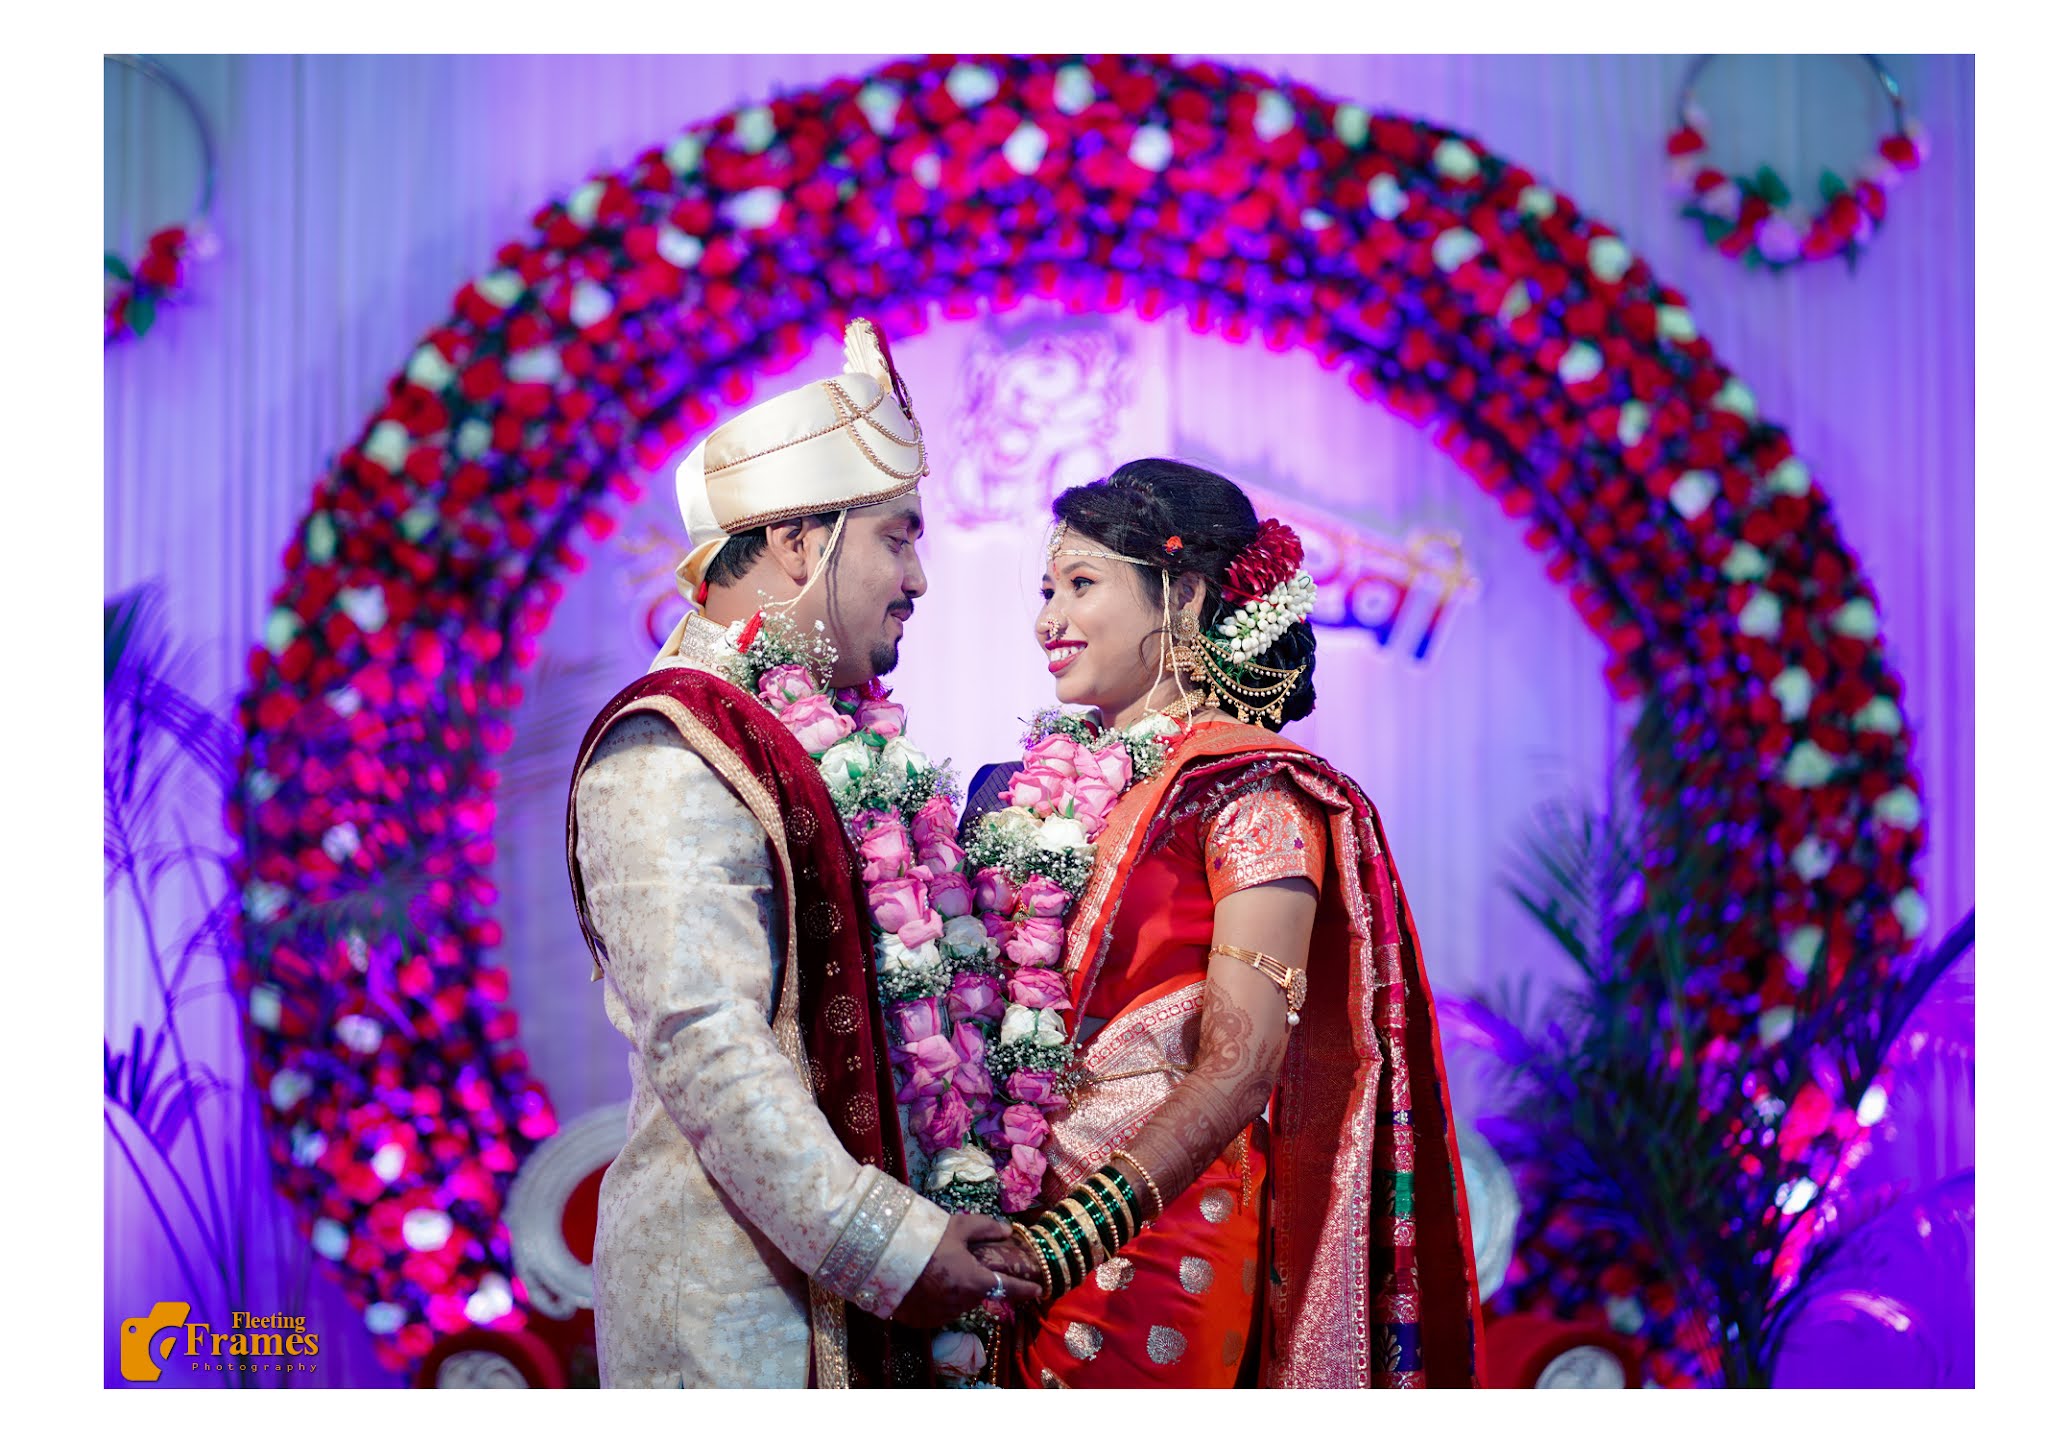 Hindu marriage images hd